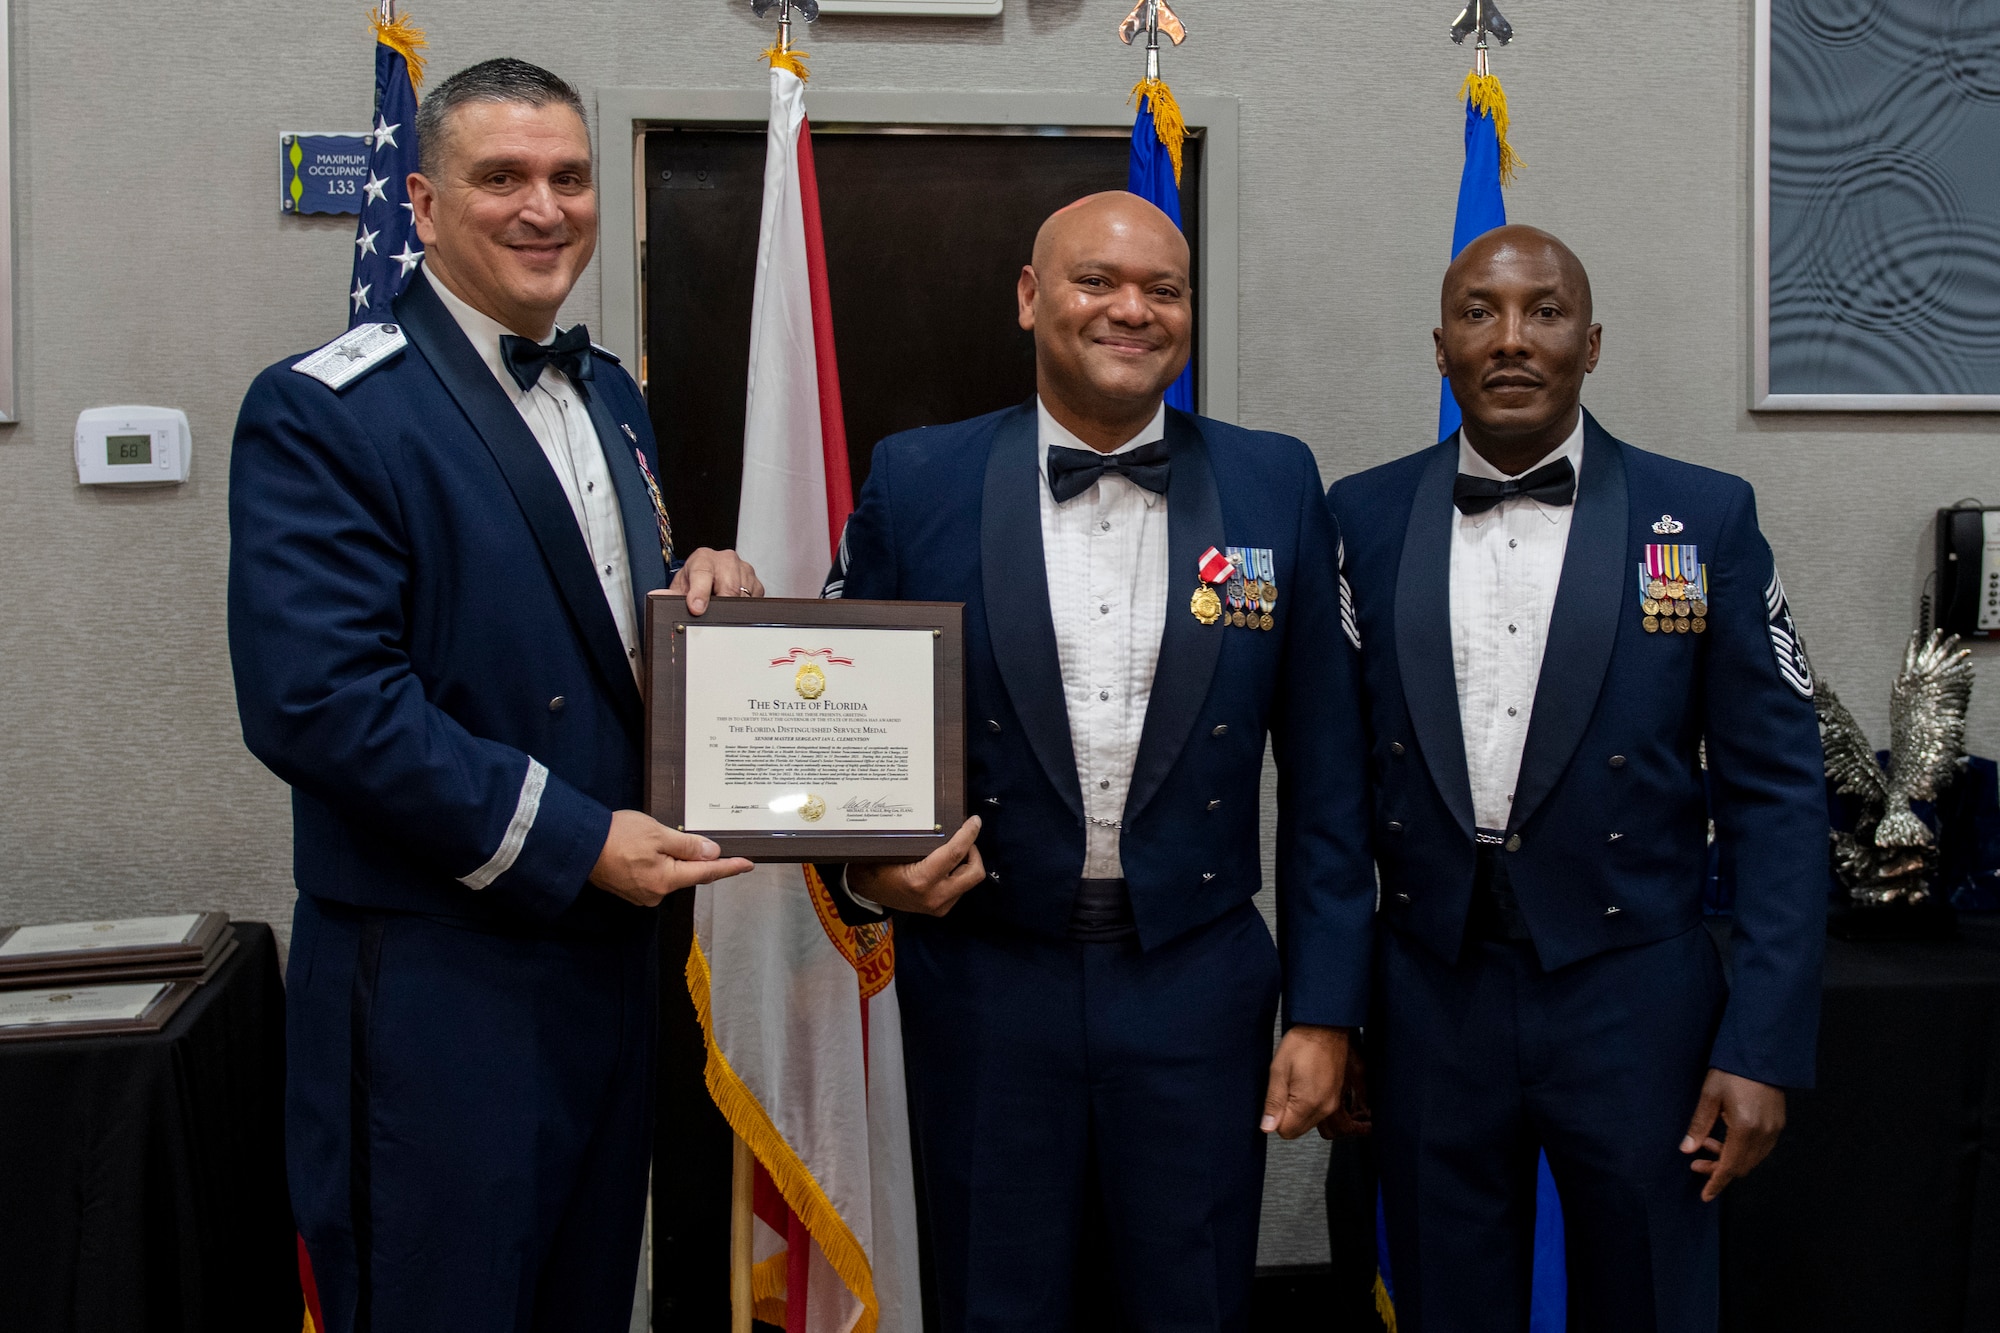 Senior Master Sgt. Ian Clementson receives the Florida Distinguished Service Medal at the Florida Air National Guard's Airman of the Year banquet held in Jacksonville, Fla. on January 8, 2022. Clementson holds the title of Airman of the Year for the Senior Non-Commissioned Officer category this year. The Airman of the Year award program is designed to recognize Airmen who display superior leadership, job performance and personal achievement during the prior calendar year. (U.S. Air National Guard photo by Senior Airman Jacob Hancock)